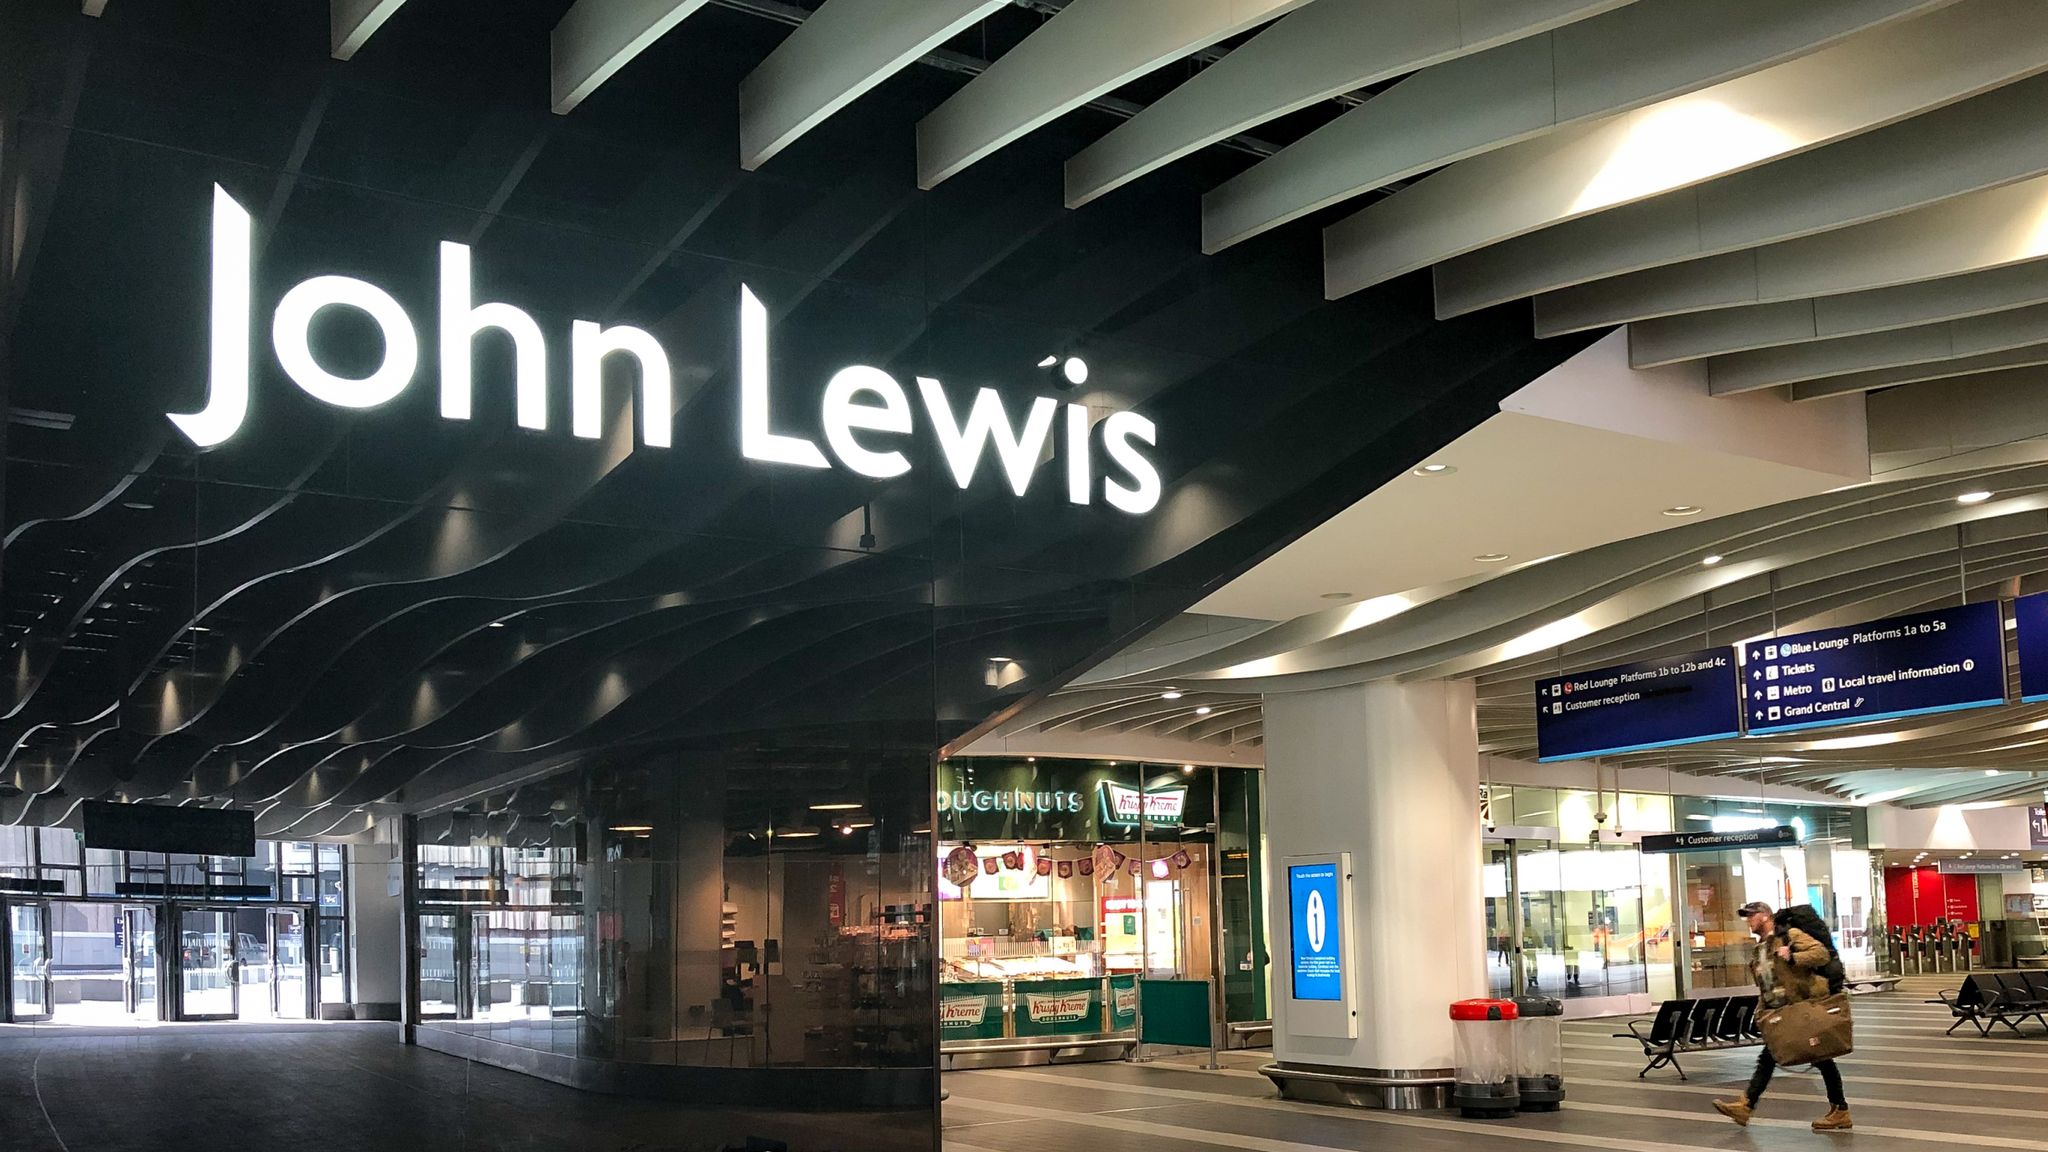 John Lewis offering Botox injections in six UK stores: Journalist Angela Epstein reacts